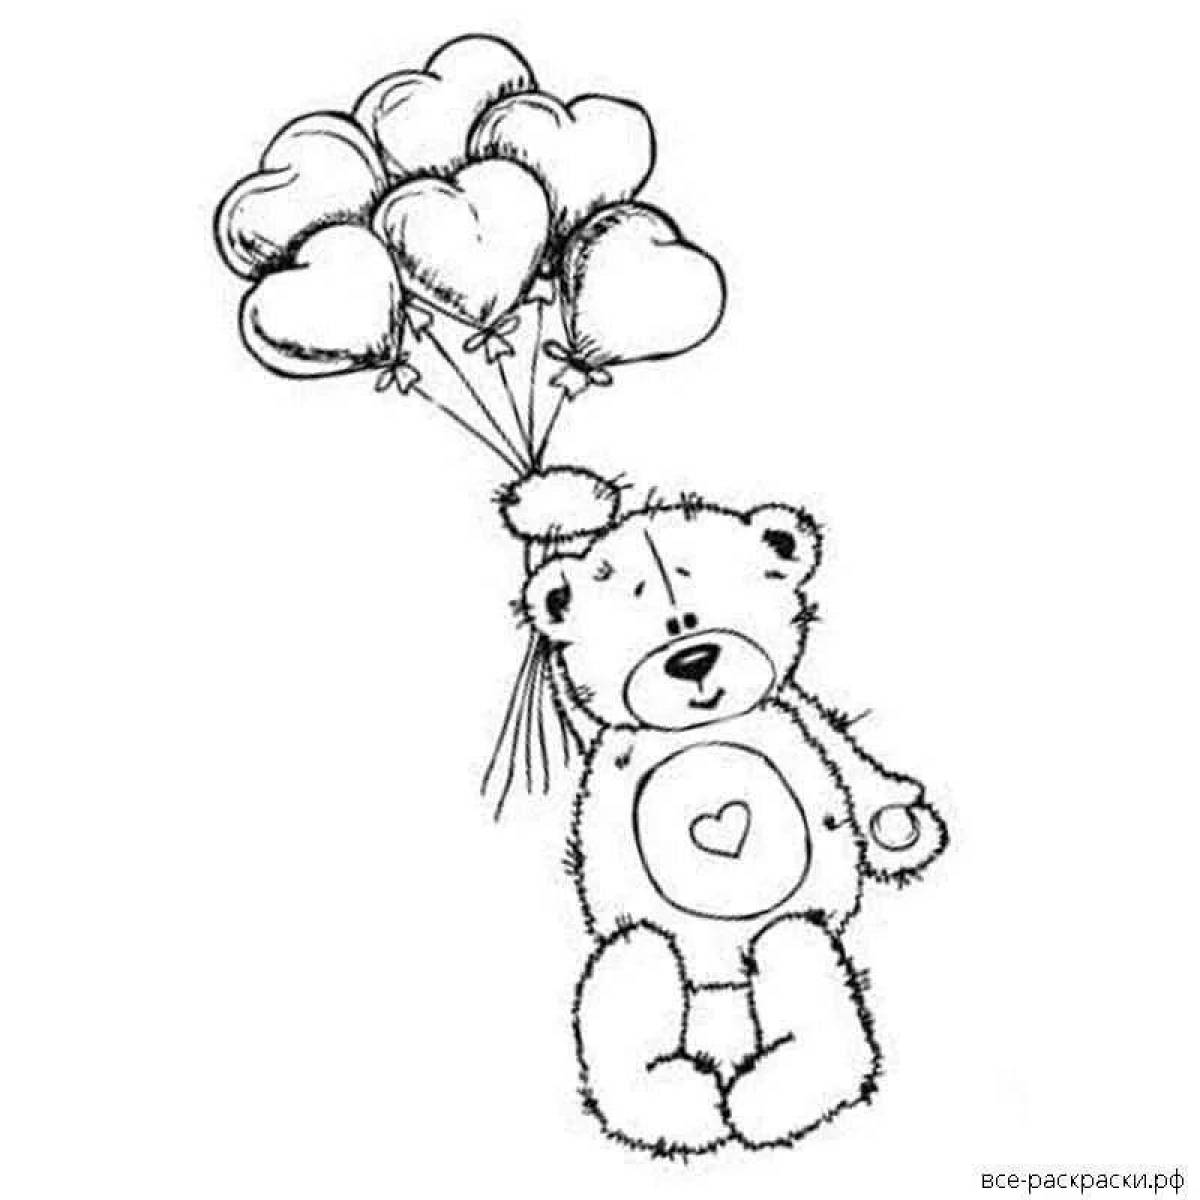 Grinning bear with balloons